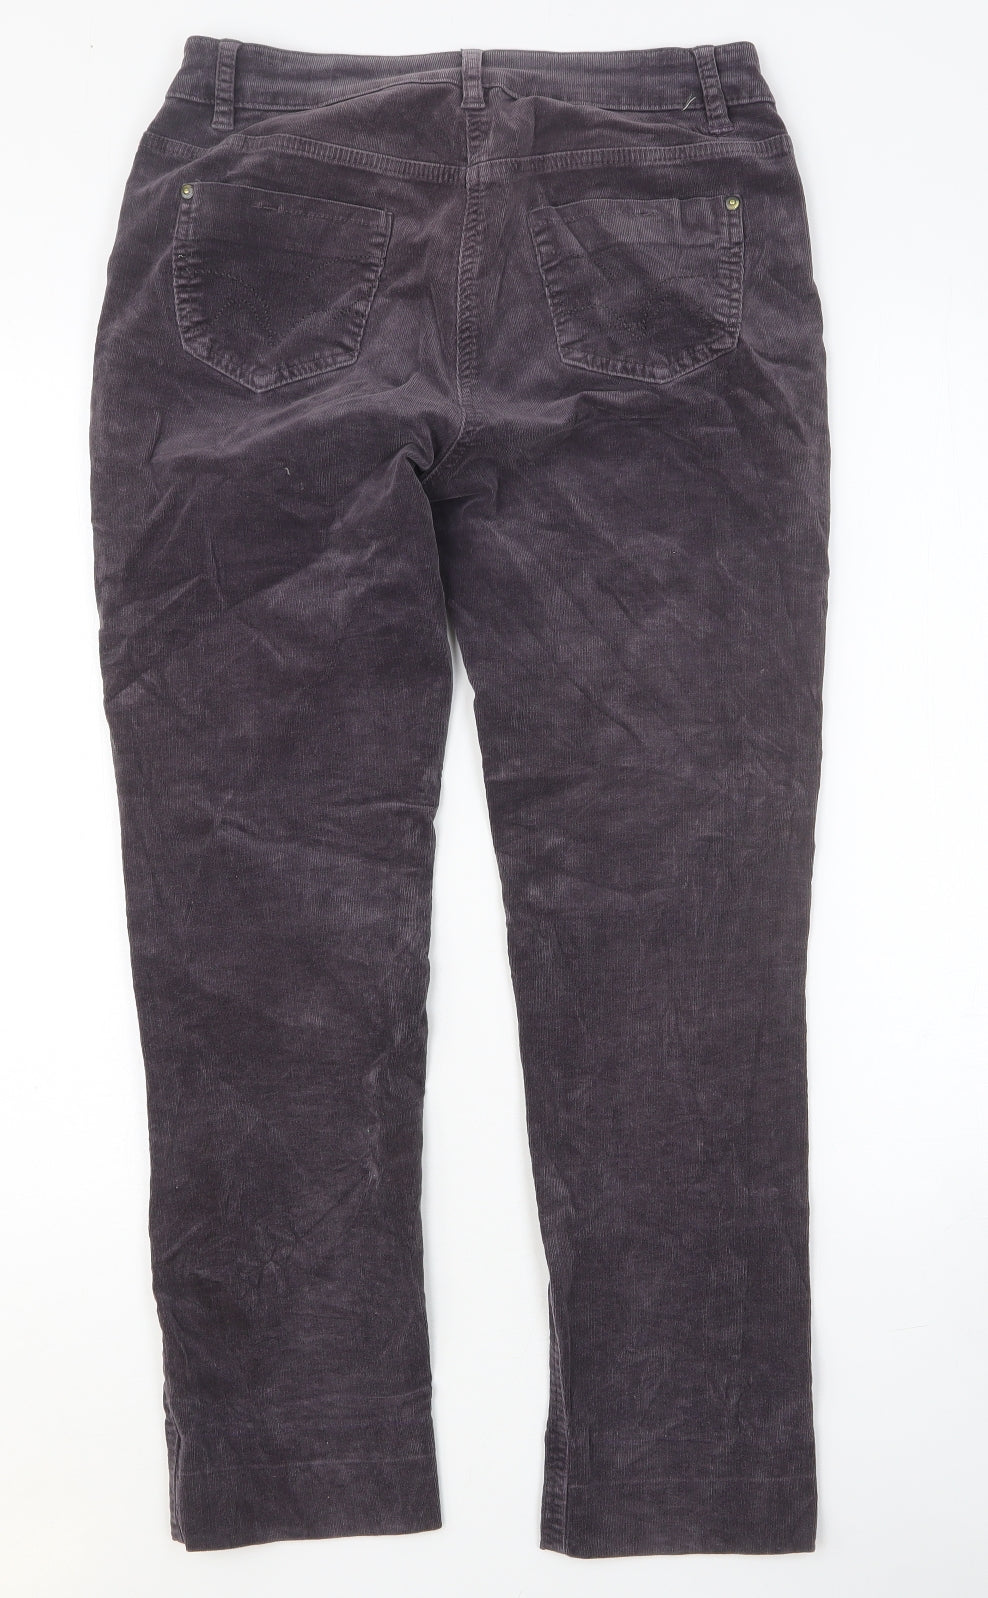 Moda Womens Purple Cotton Trousers Size 10 Regular Button - Embroidered Detail